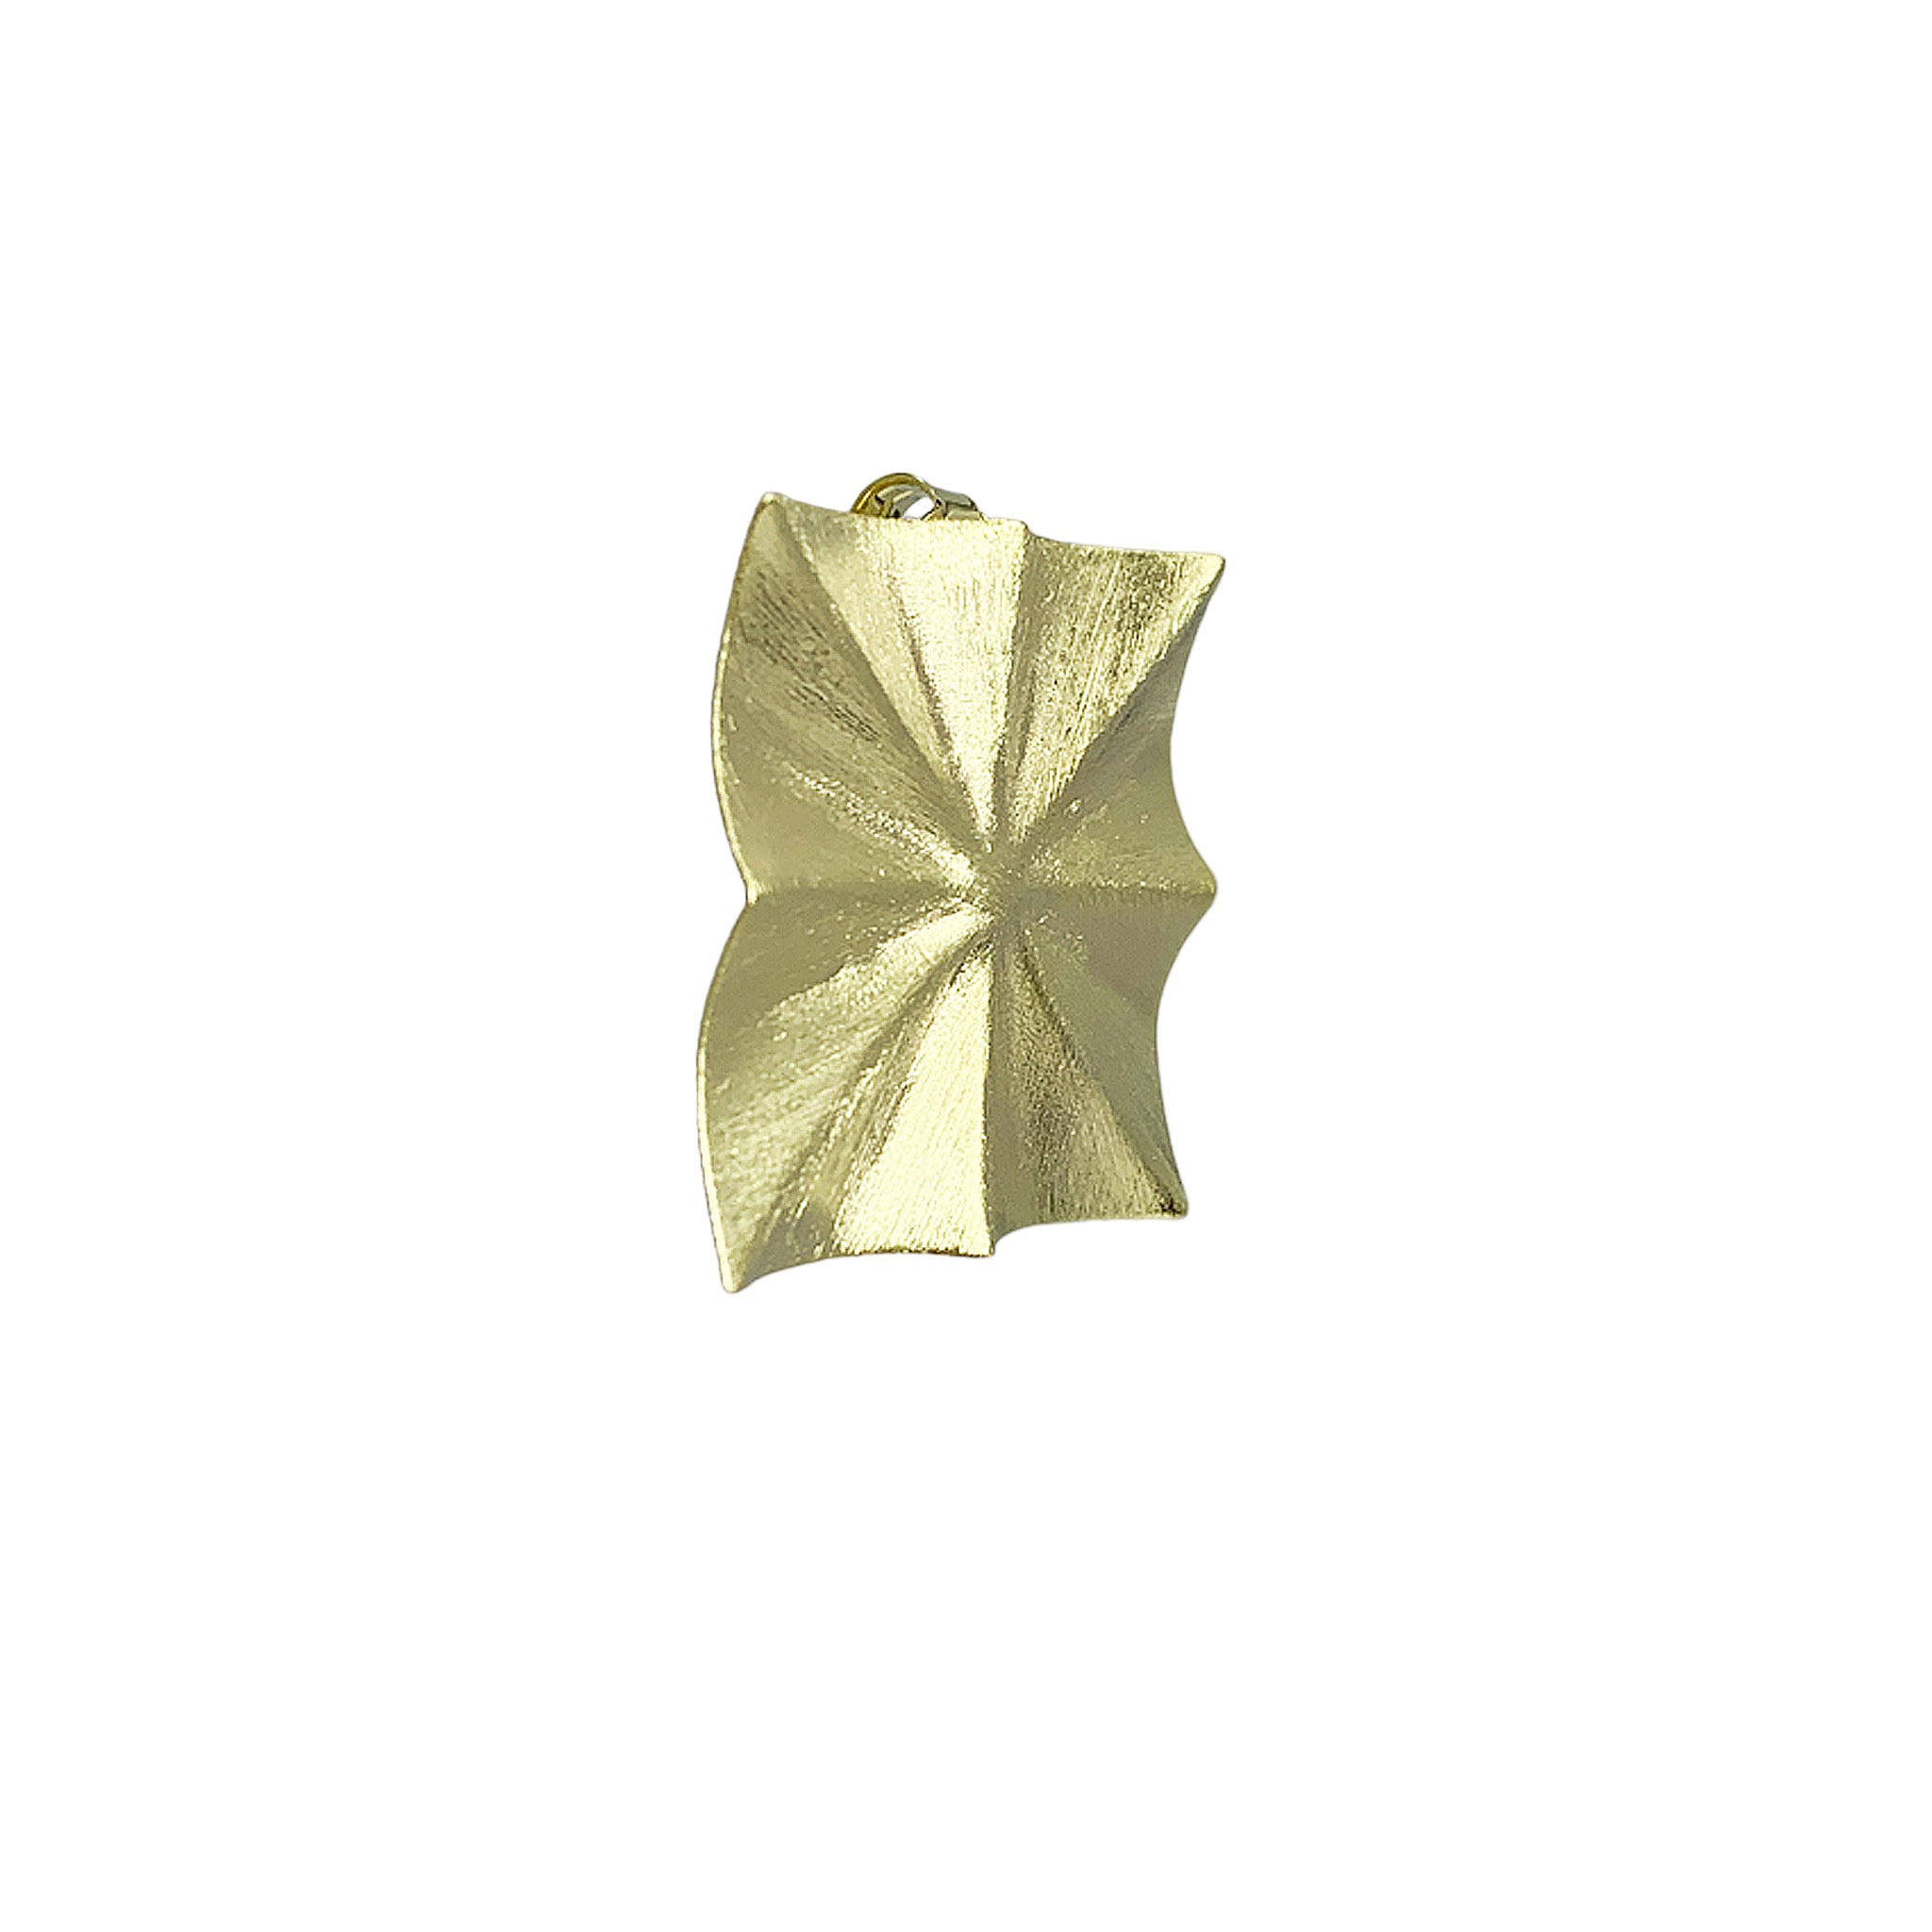 Sheila Fajl Radiance Square Stud Earrings in Brushed Gold Plated